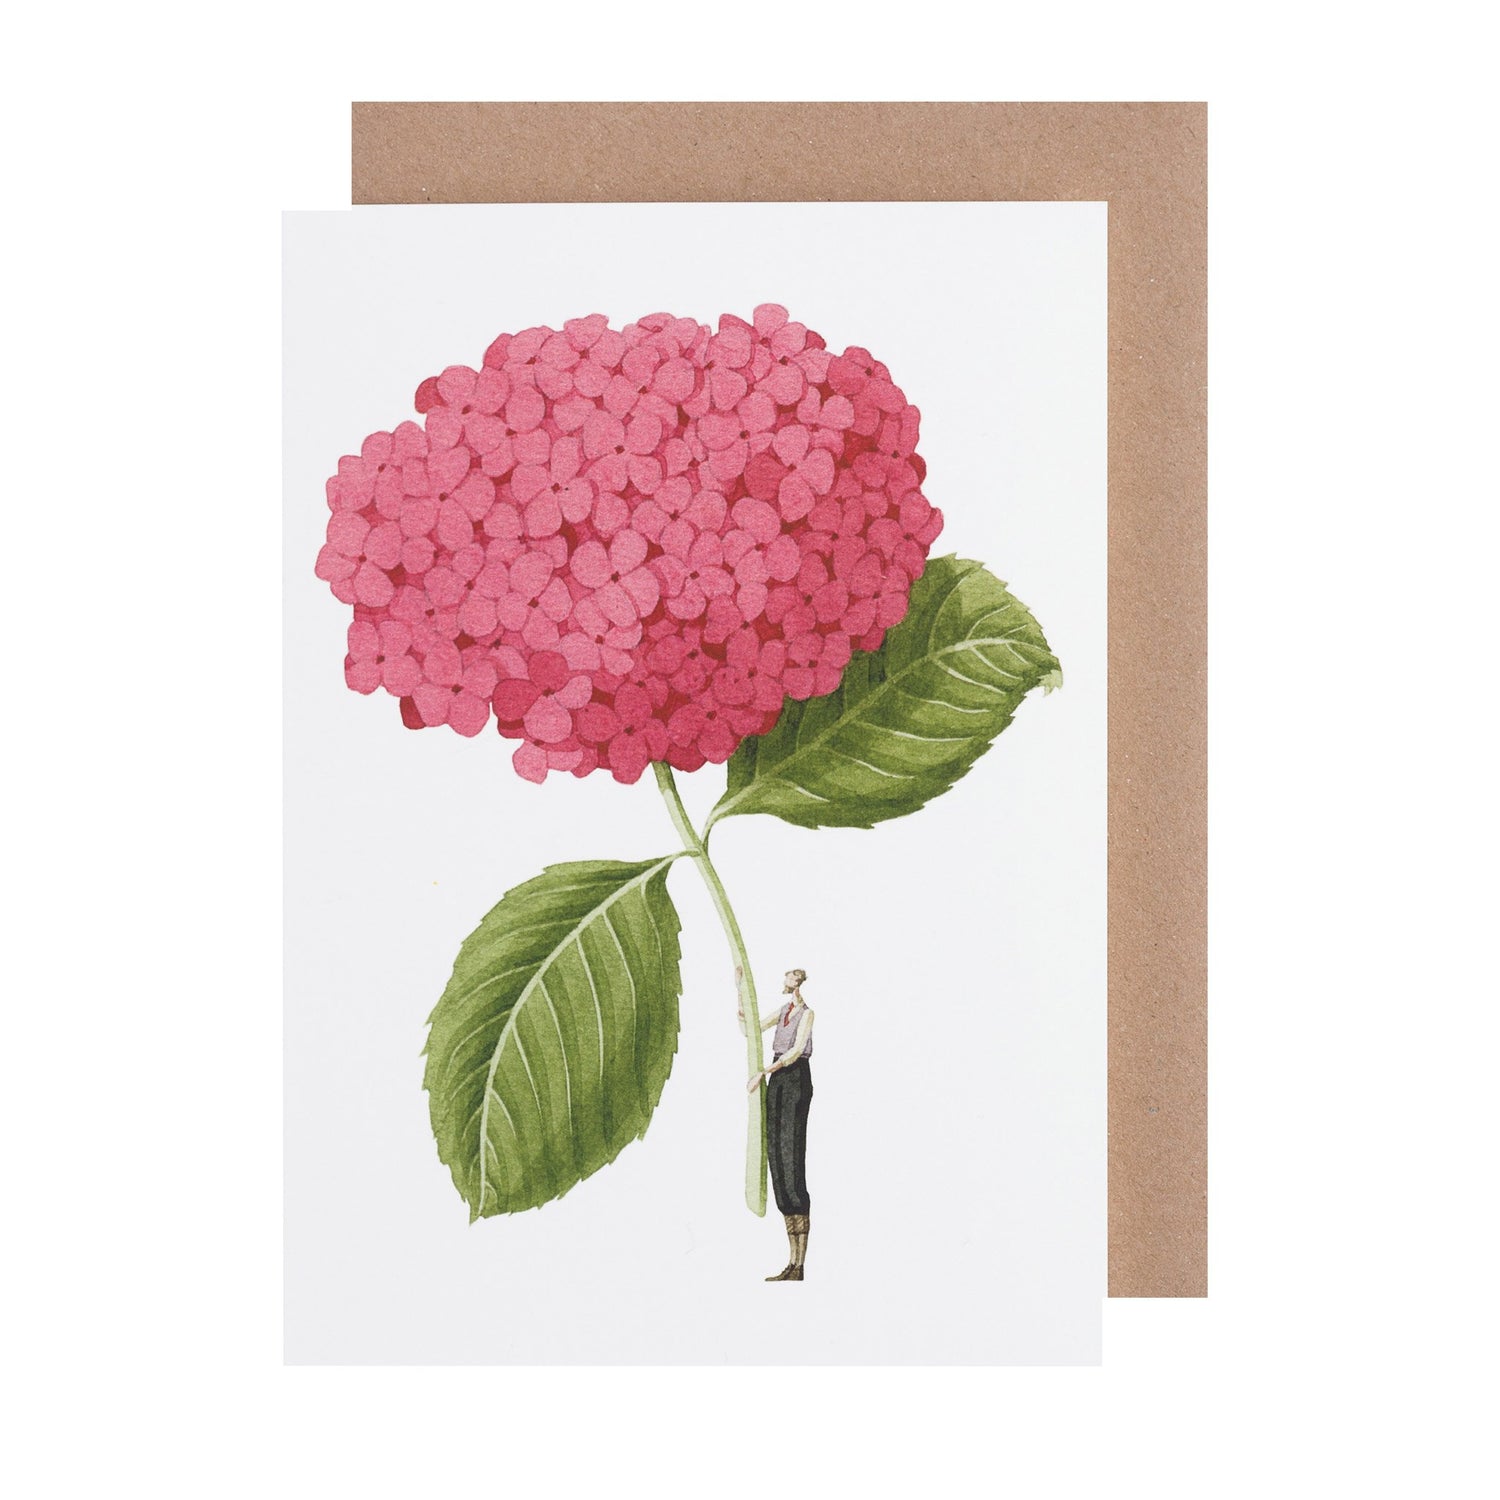 A Pink Hydrangea Greeting Card by Hester &amp; Cook, illustrated by Laura Stoddart, featuring a woman holding a pink flower.